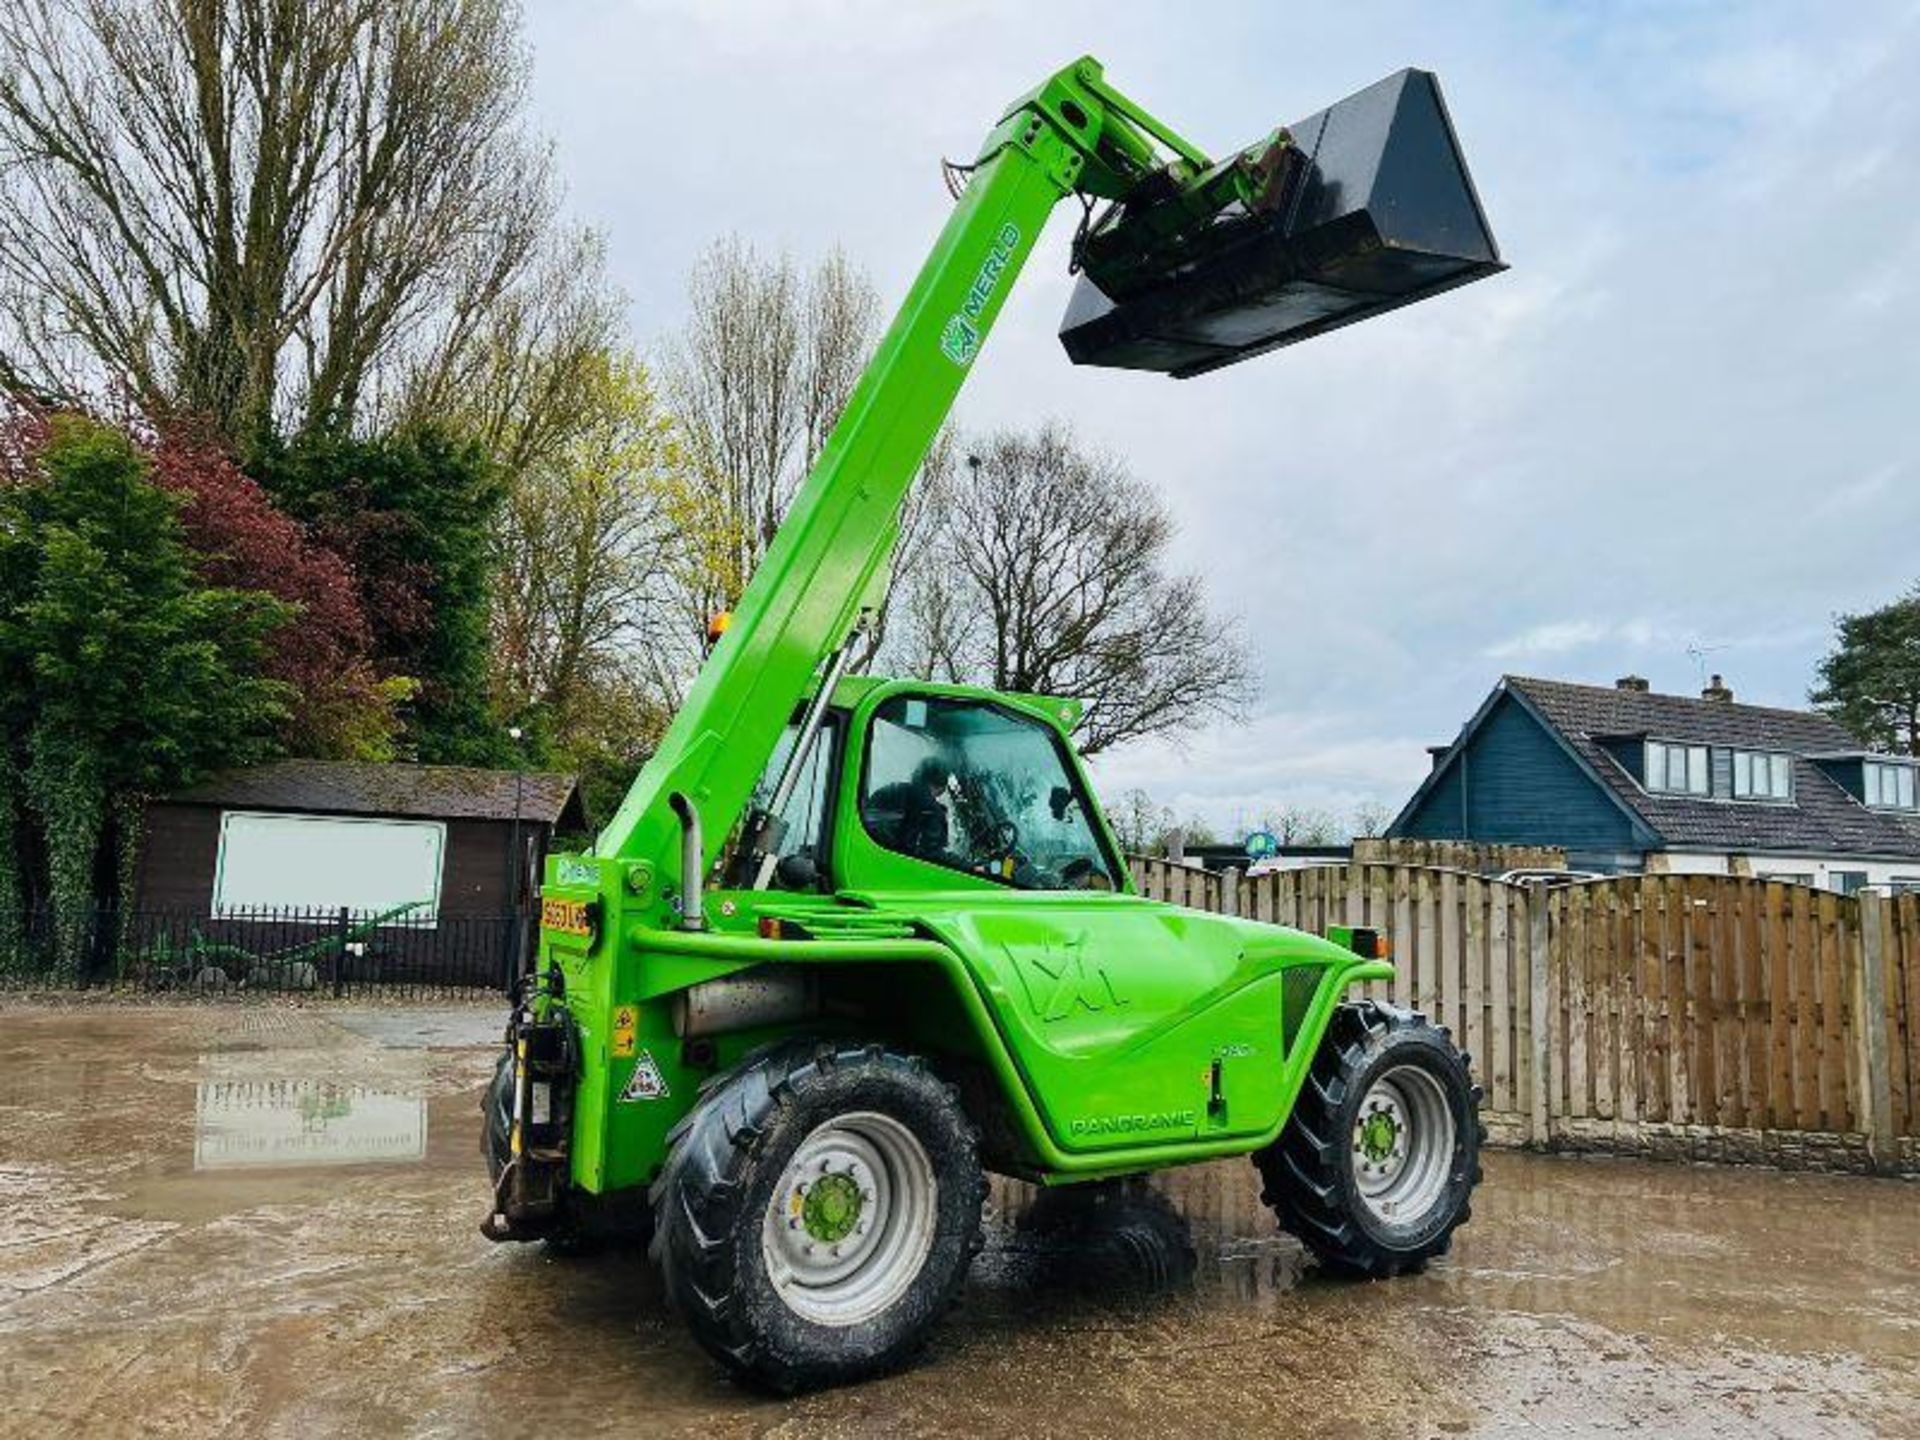 MERLO P34.7 4WD TELEHANDLER*YEAR 2013, AG SPEC* C/W PICK UP HITCH - Image 4 of 20